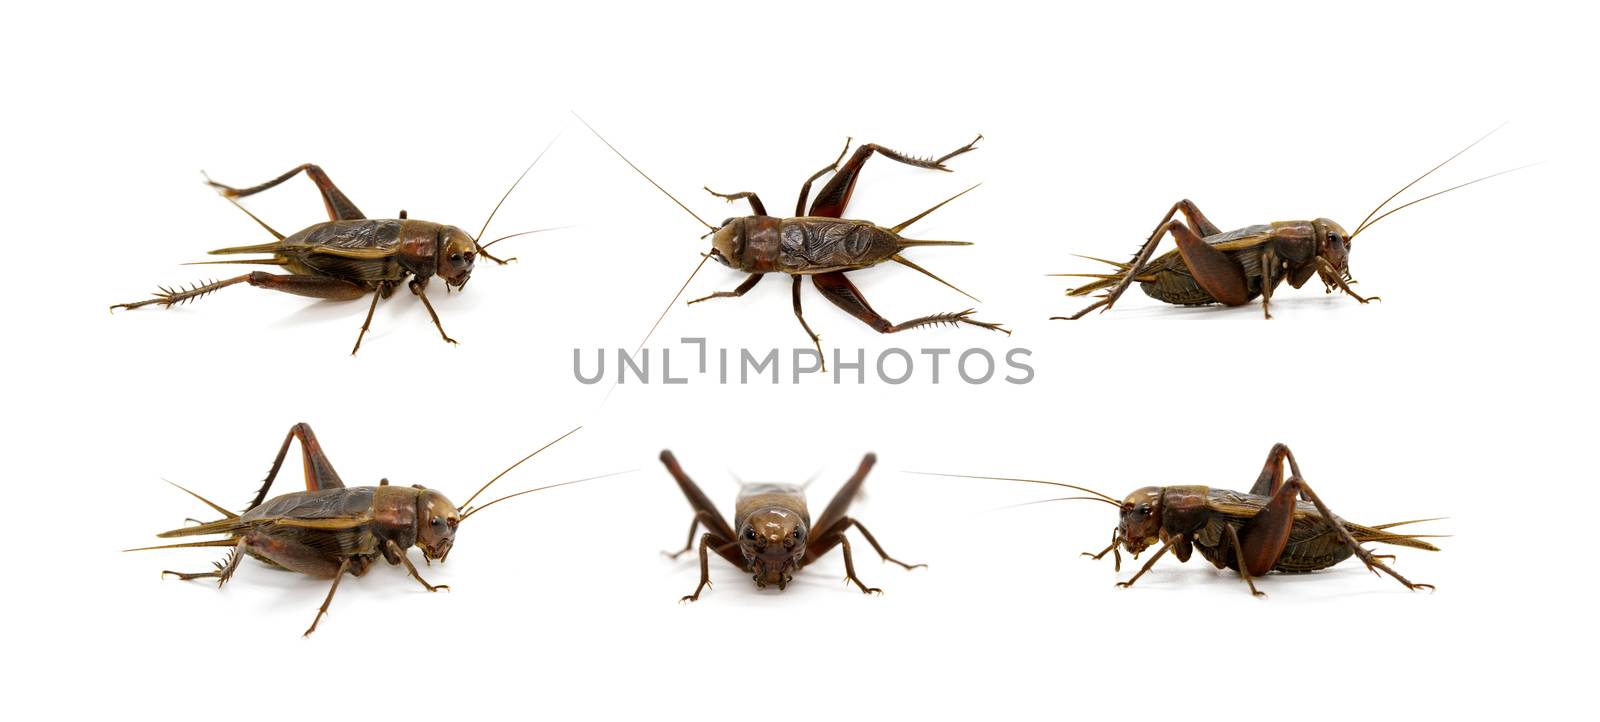 Group of cricket on white background., Insects. Animals. by yod67